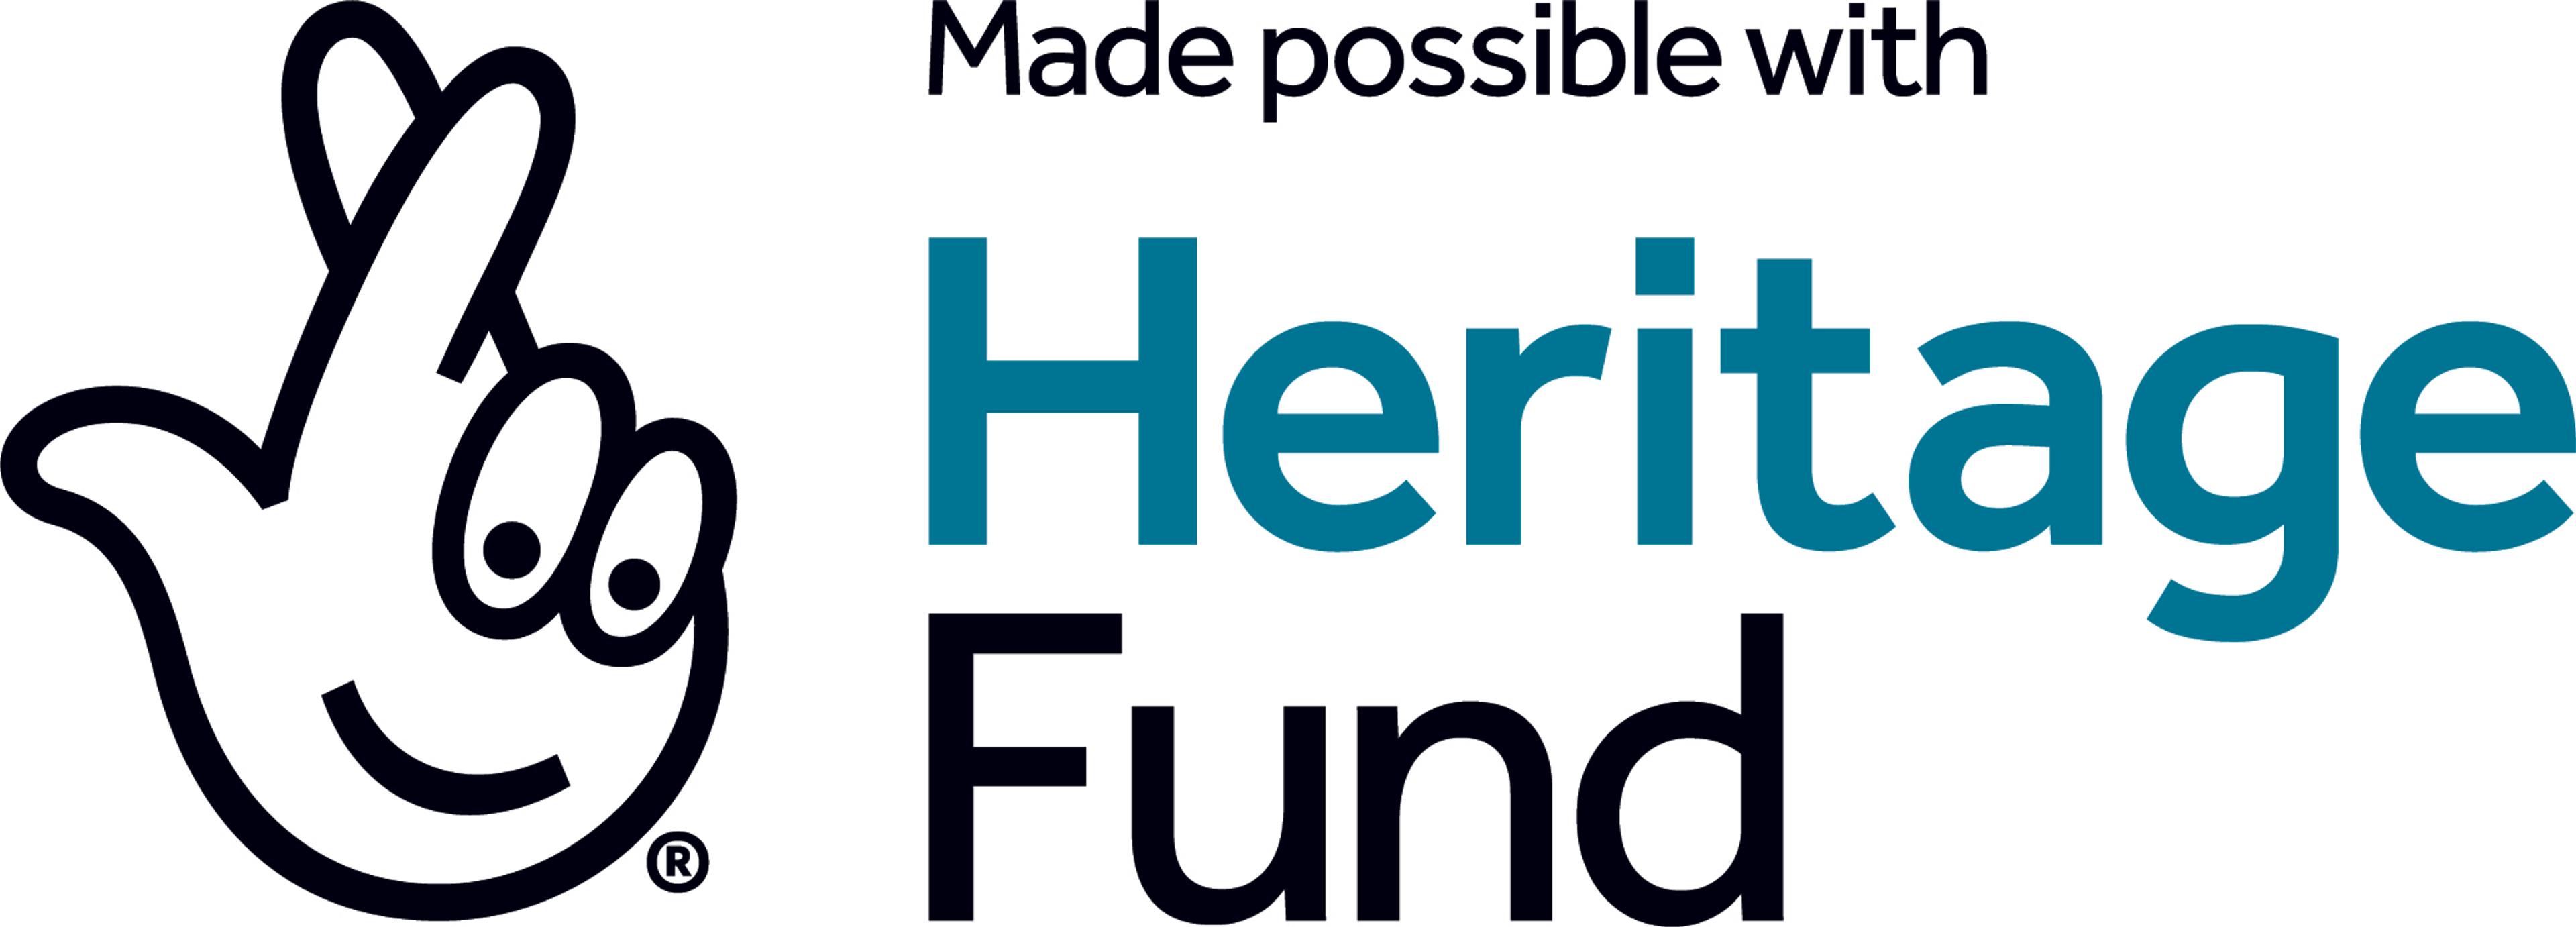 Logo: image of hand with crossed finders and the words 'Made possible with Heritage Fund'